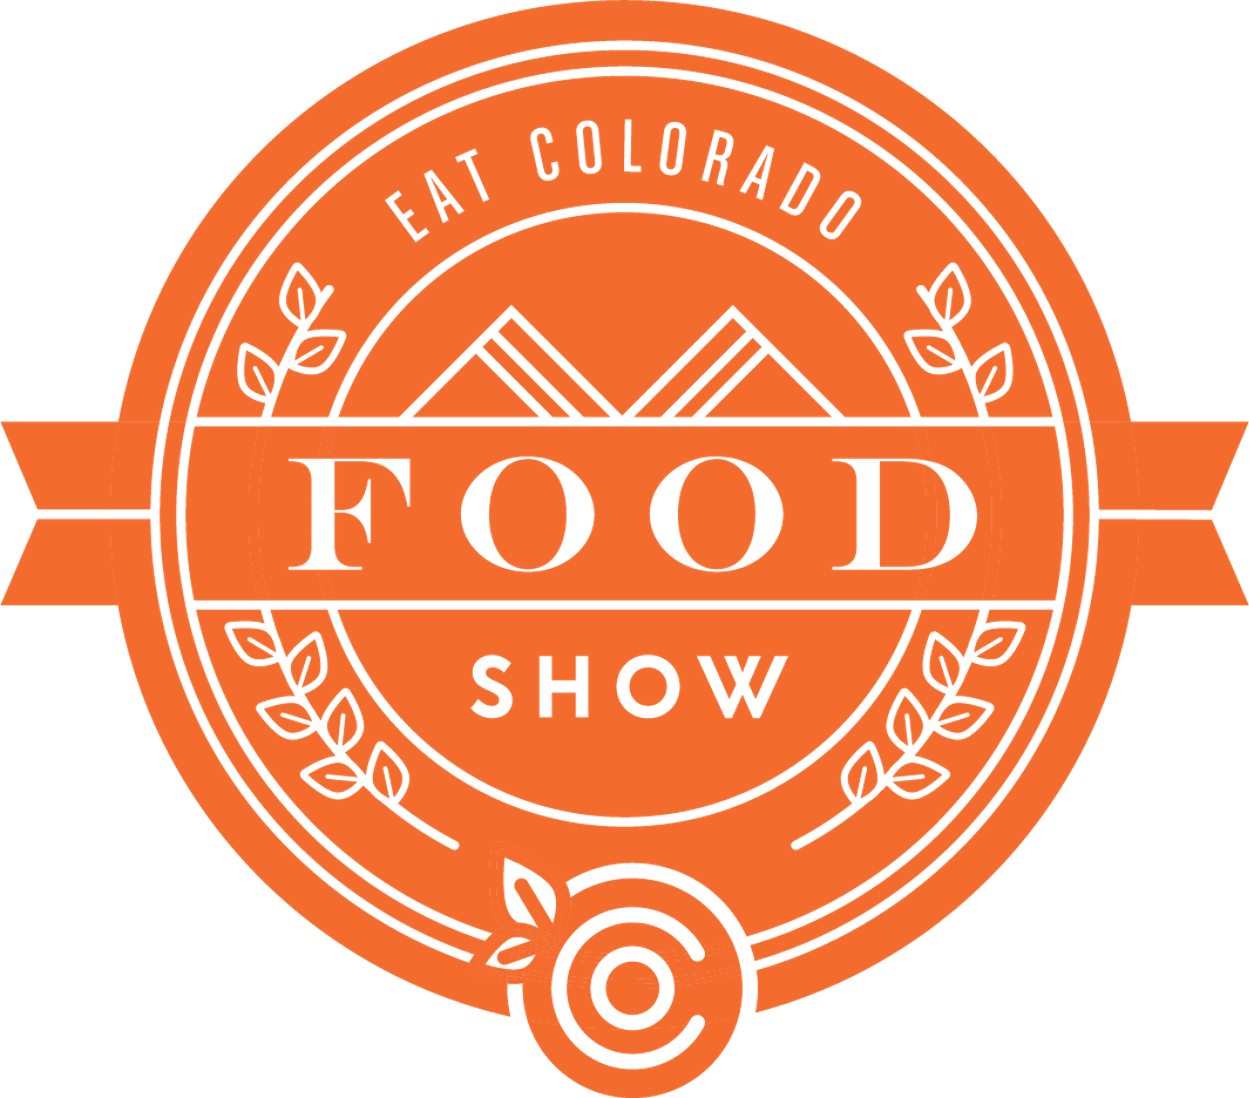 Show co. Food show.